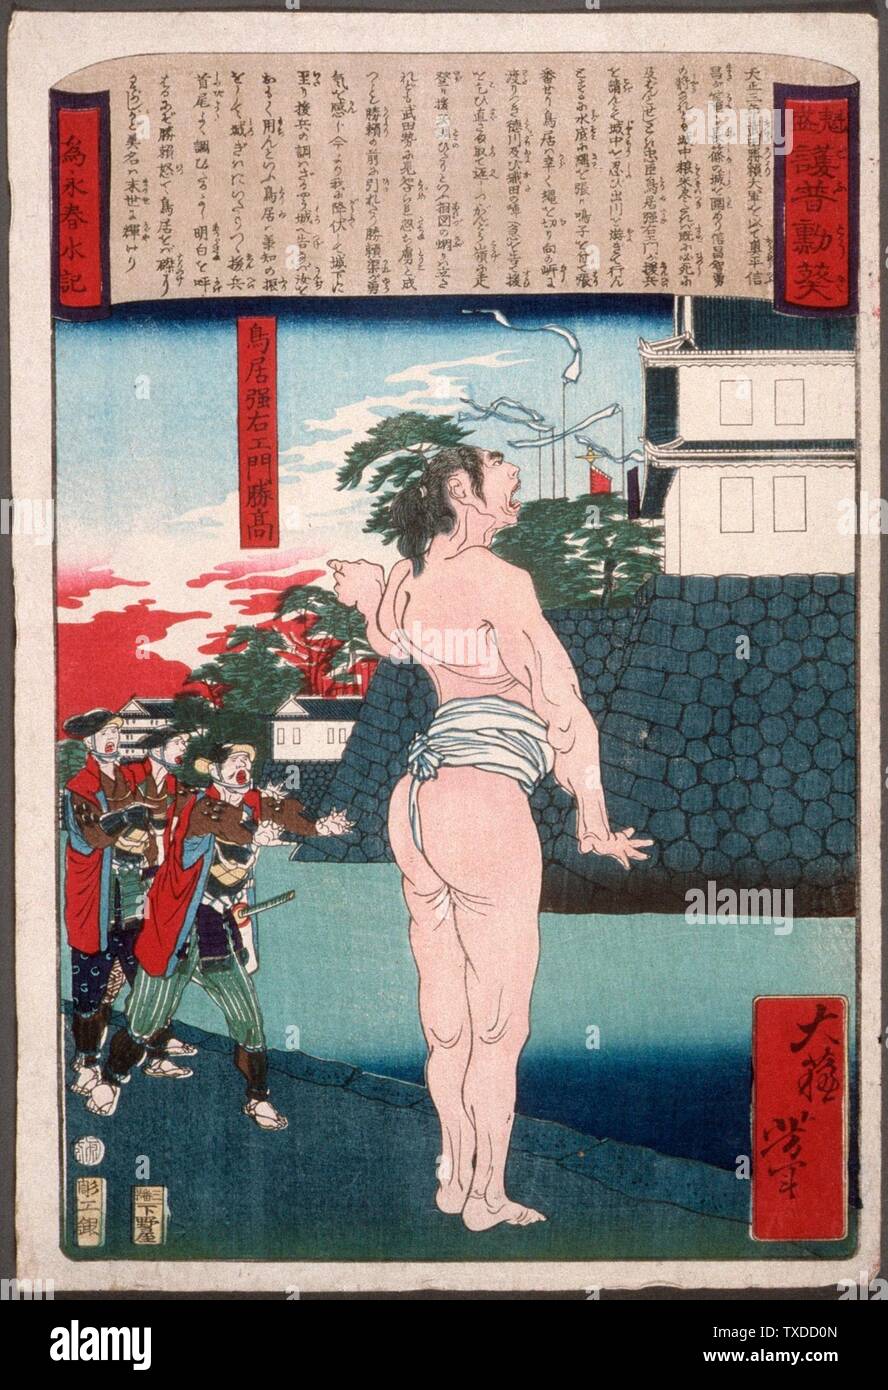 Torii KyÅemon (or Yaemon) Katsutaga Standing by a Moat;  Japan, 7/1875 Series: Exploits of the Tokugawa Clan Prints; woodcuts Color woodbk print Herbert R. Cole Collection (M.84.31.264) Japanese Art; July 1875date QS:P571,+1875-07-00T00:00:00Z/10; Stock Photo